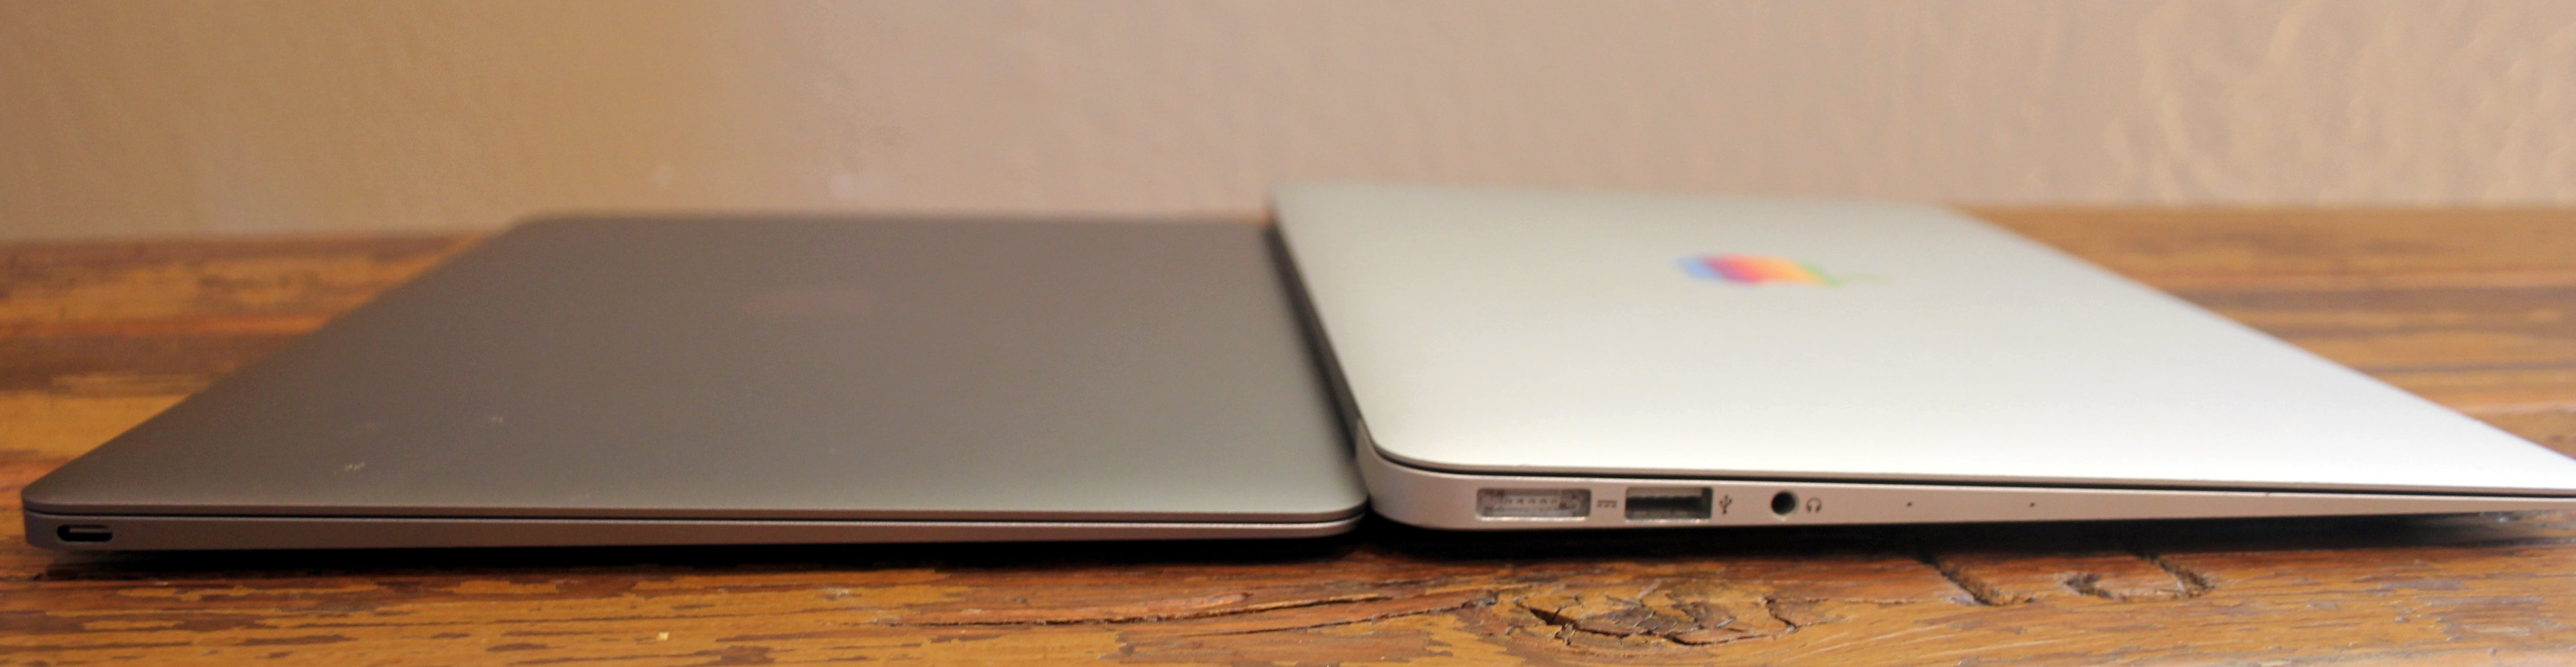 Review The New 12 Inch Macbook Is A Laptop Without An Ecosystem Macworld